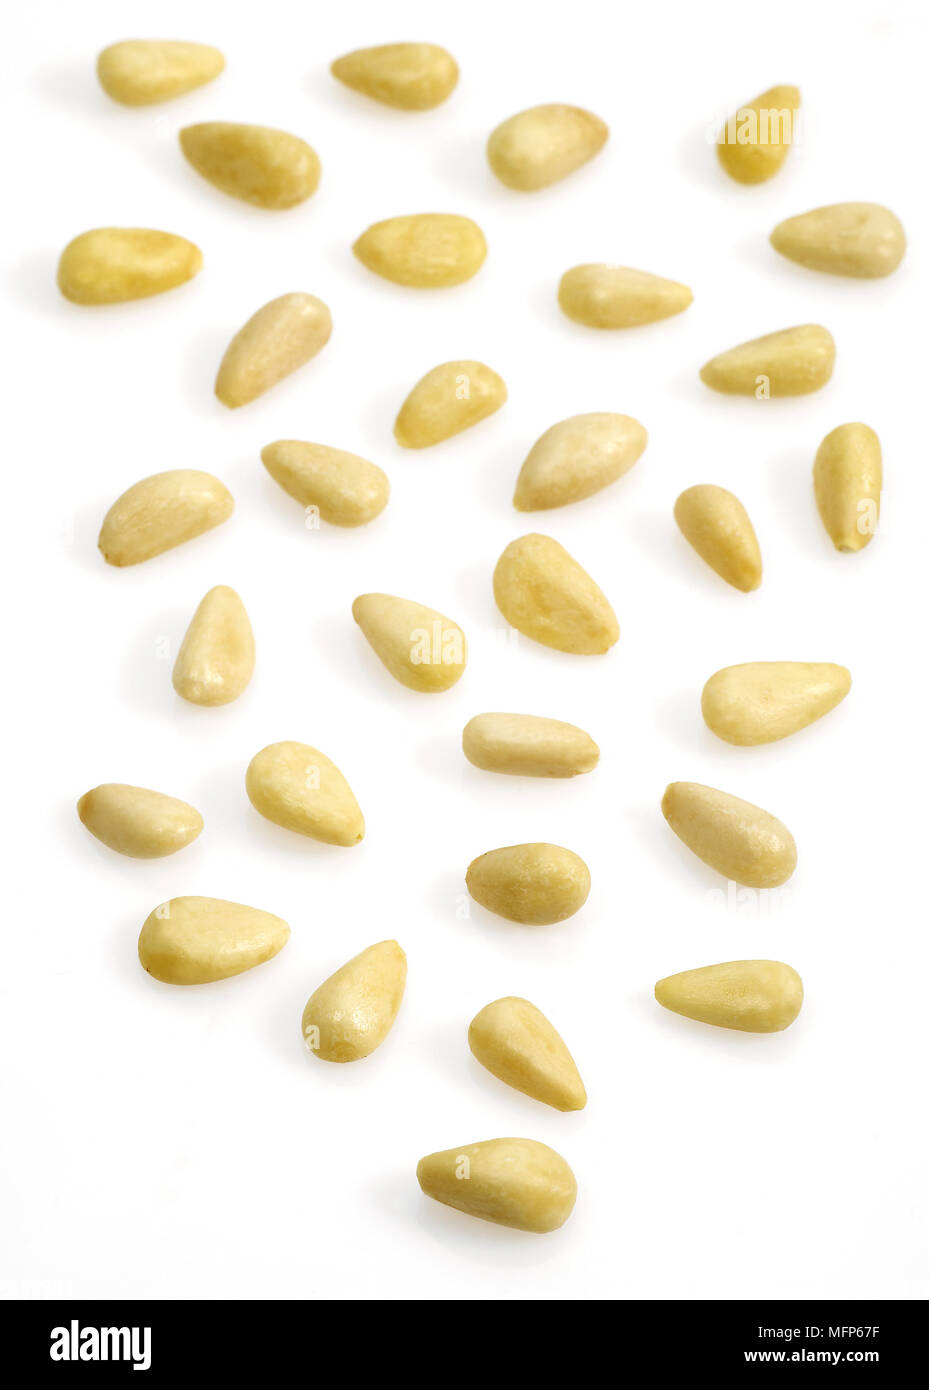 Pine Kernel or Pine Nut, pinus sp, Nuts against White Background Stock Photo